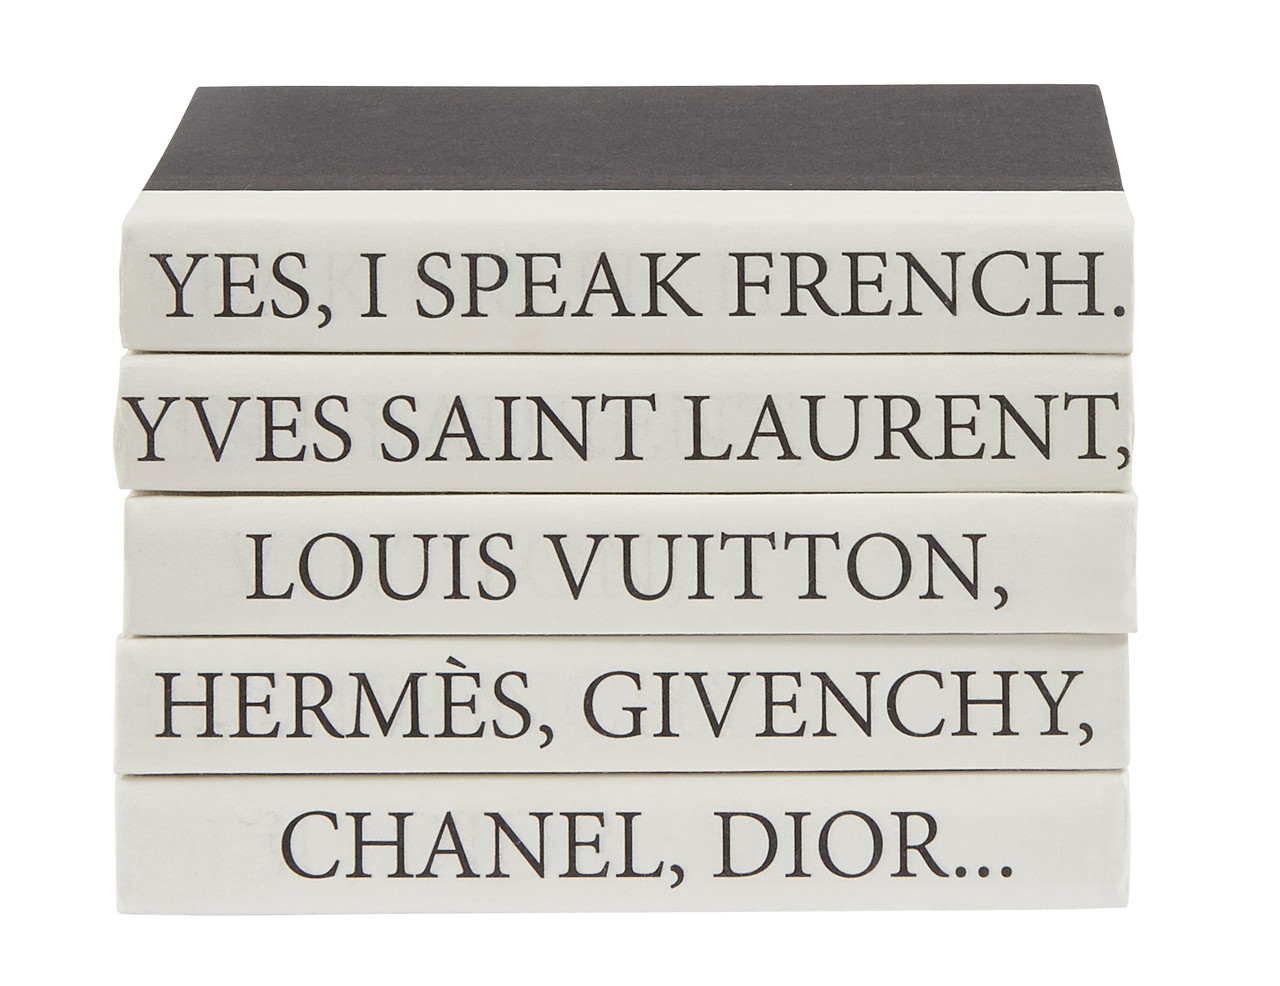 5 Vol- I Speak French Quote on Muted Distressed Gold / Off-White  Covers / 9.5 wide / Approx. 6.25 tall